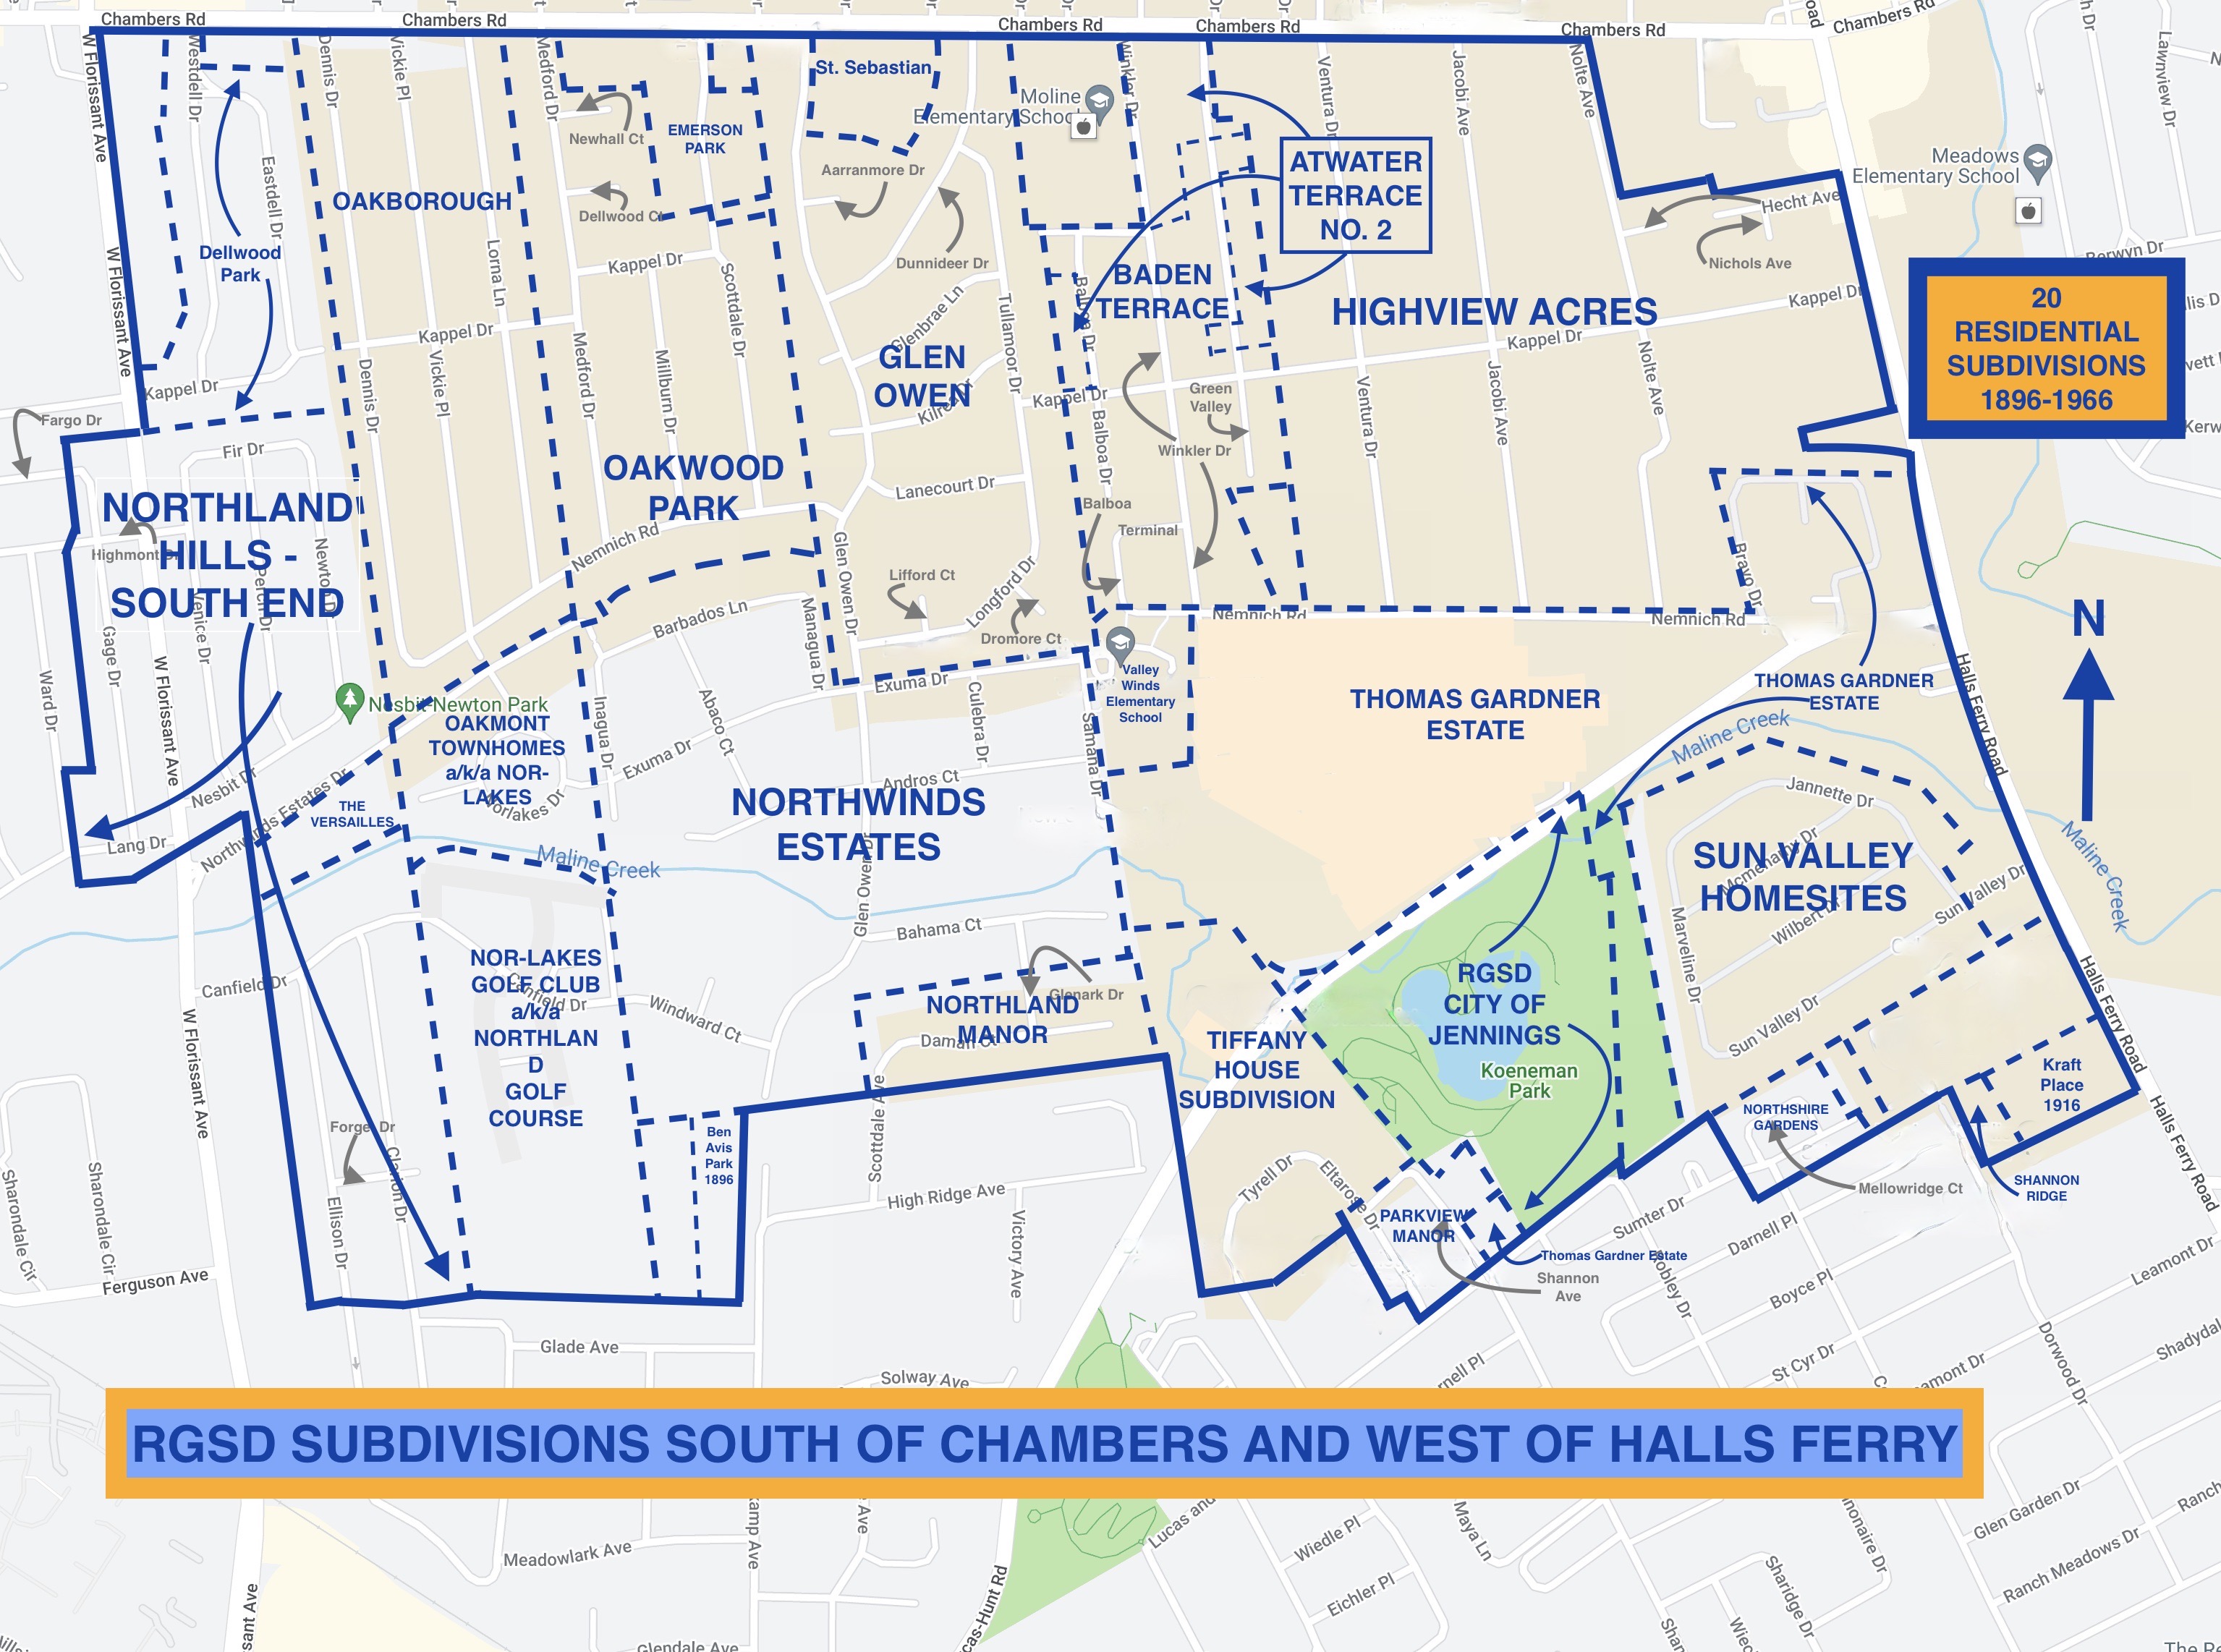 RIVERVIEW GARDENS SCHOOL DISTRICT: SUBDIVISIONS SOUTH OF CHAMBERS AND WEST OF HALLS FERRY. 